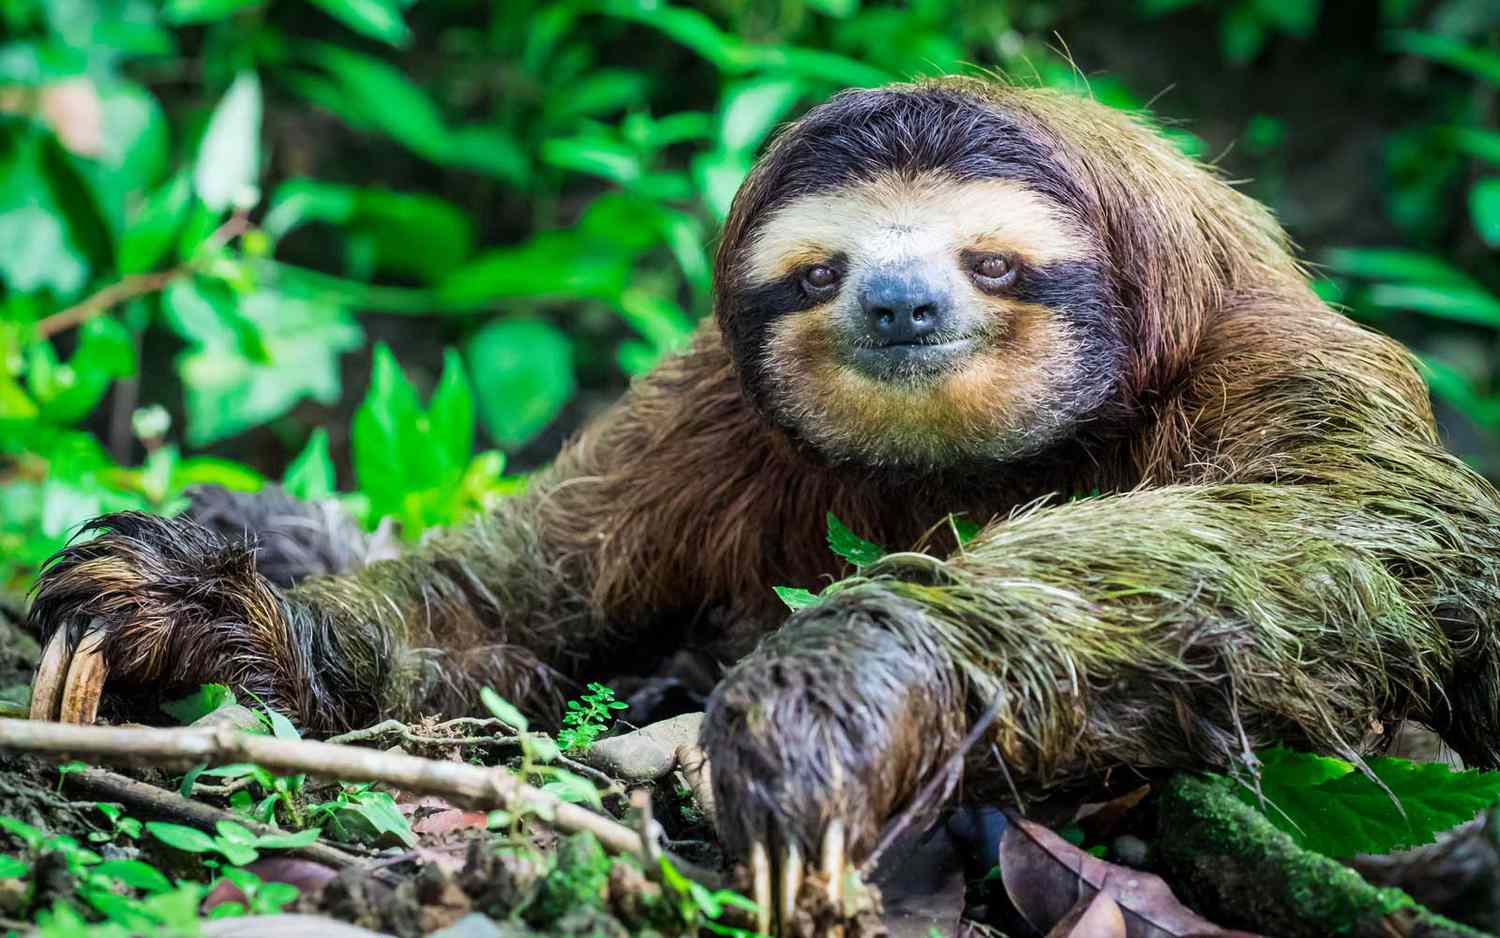 How fast does a sloths swim?